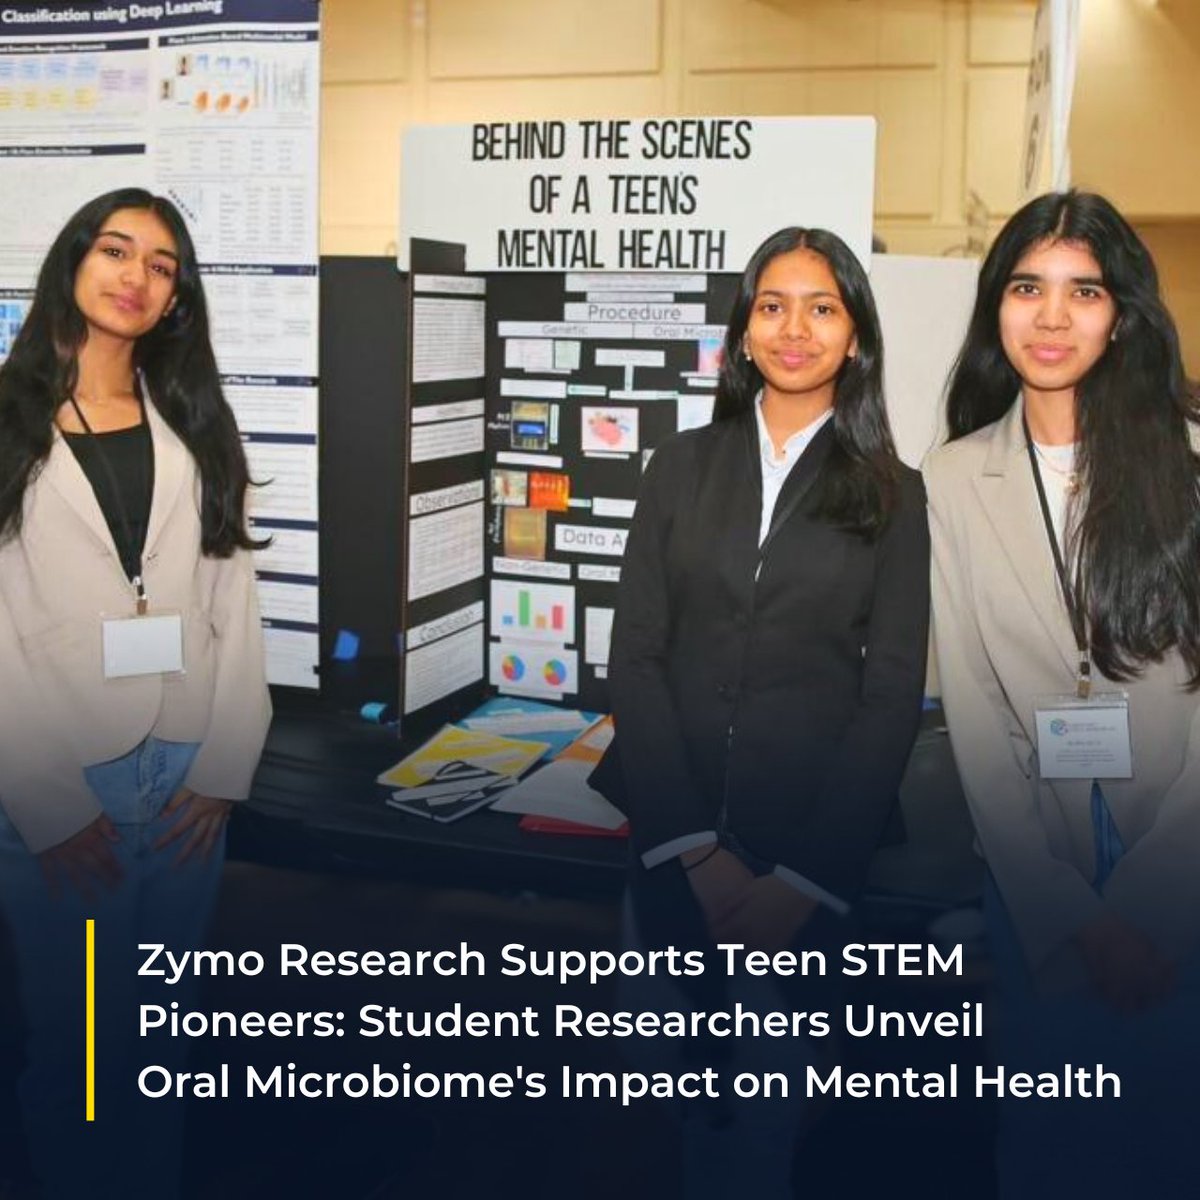 We're proud to support these young pioneers dedicated to unraveling critical issues affecting their peers. They explored how oral health, genes, and lifestyle affect mental well-being in 31 teens. Explore the microbiome technologies used in their study: zymoresearch.com/pages/microbio…